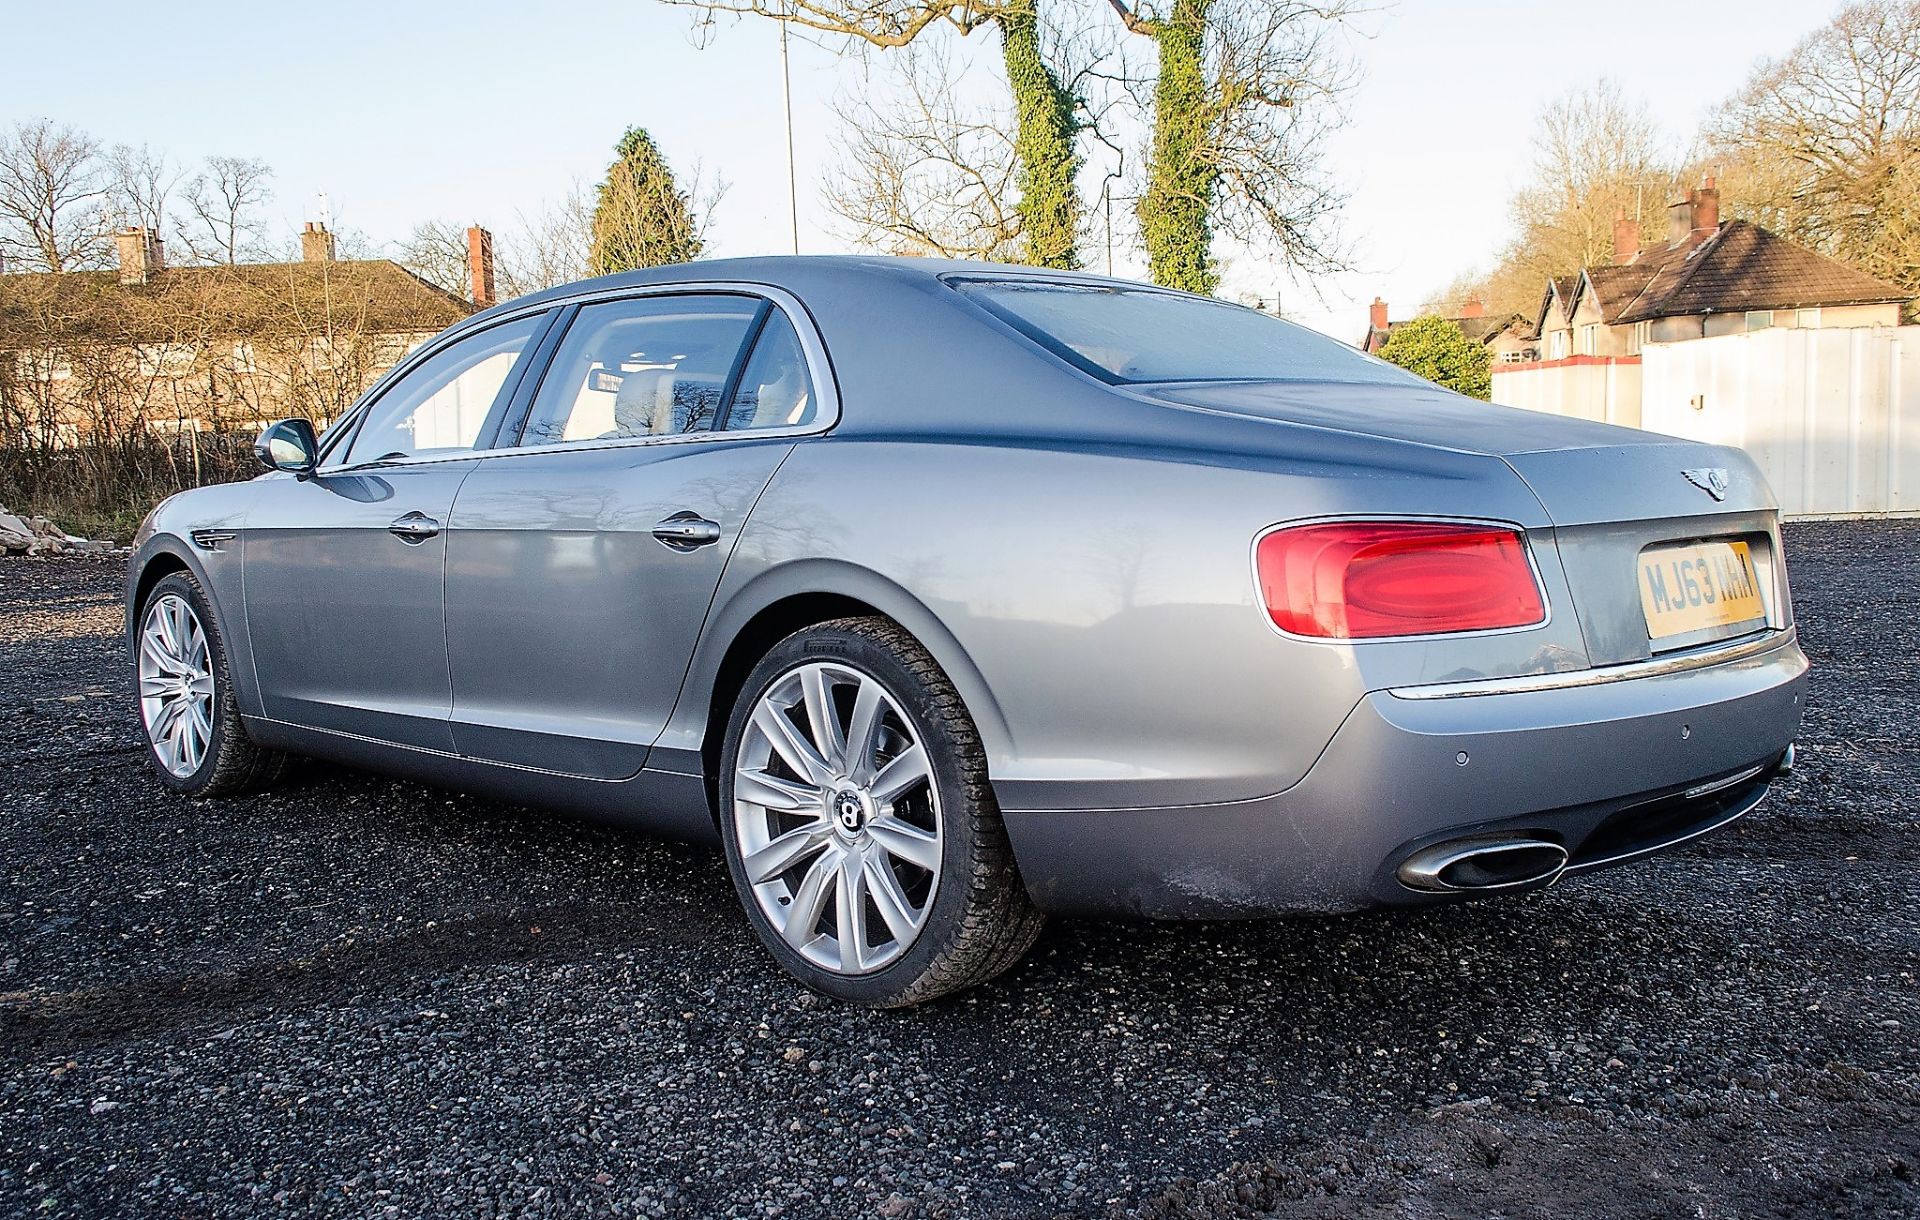 Bentley Flying Spur 6.0 W12 automatic 4 door saloon car Registration Number: MJ63 NHM Date of - Image 3 of 51